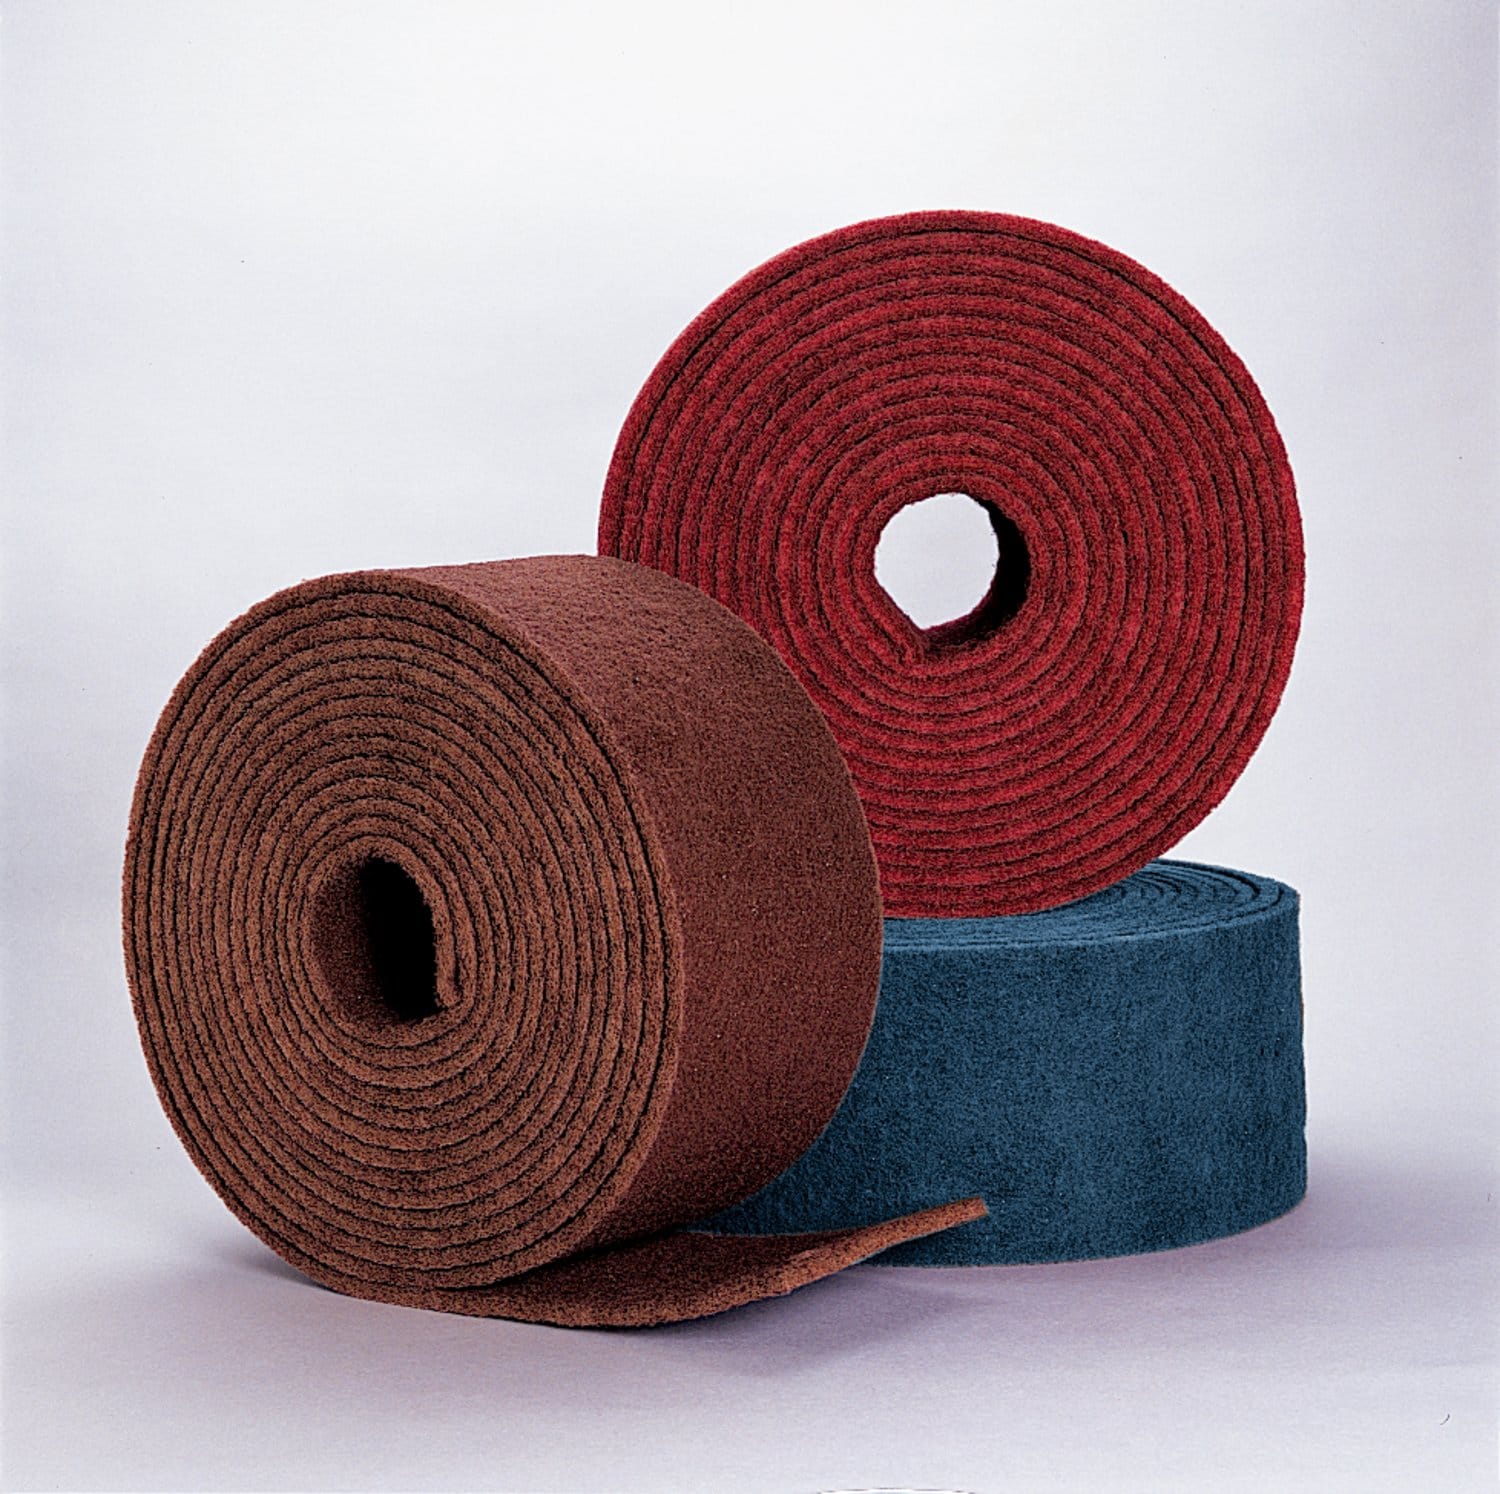 7000047084 - Standard Abrasives Aluminum Oxide Buff and Blend EP Roll, 830105, Very
Fine, 4-1/2 in x 30 ft, 2 ea/Case